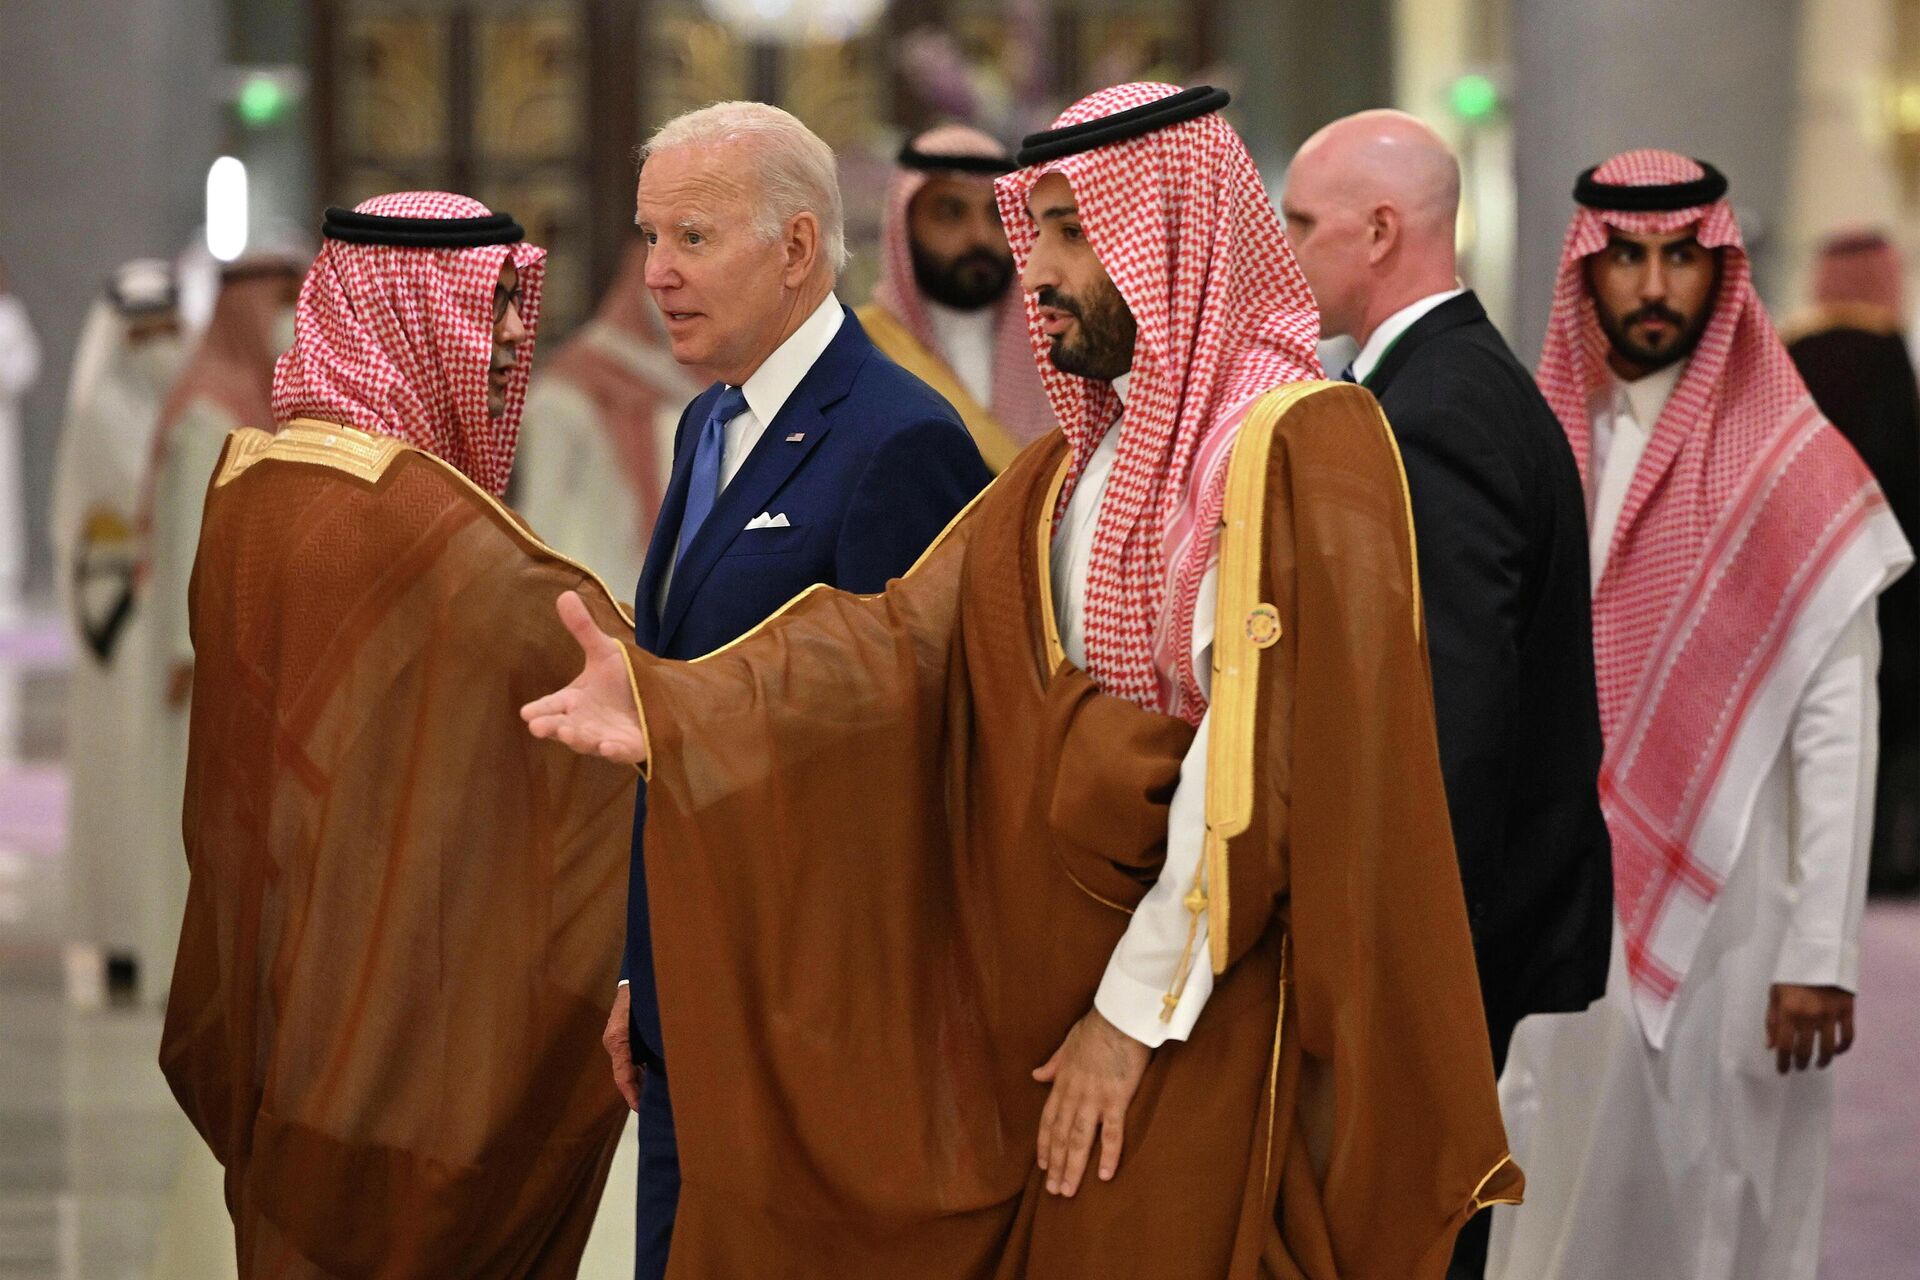 U.S. President Joe Biden, center left, and Saudi Crown Prince Mohammed bin Salman, center, arrive for the family photo during the GCC+3 (Gulf Cooperation Council) meeting at a hotel in Saudi Arabia's Red Sea coastal city of Jeddah Saturday, July 16, 2022 - Sputnik International, 1920, 17.07.2022